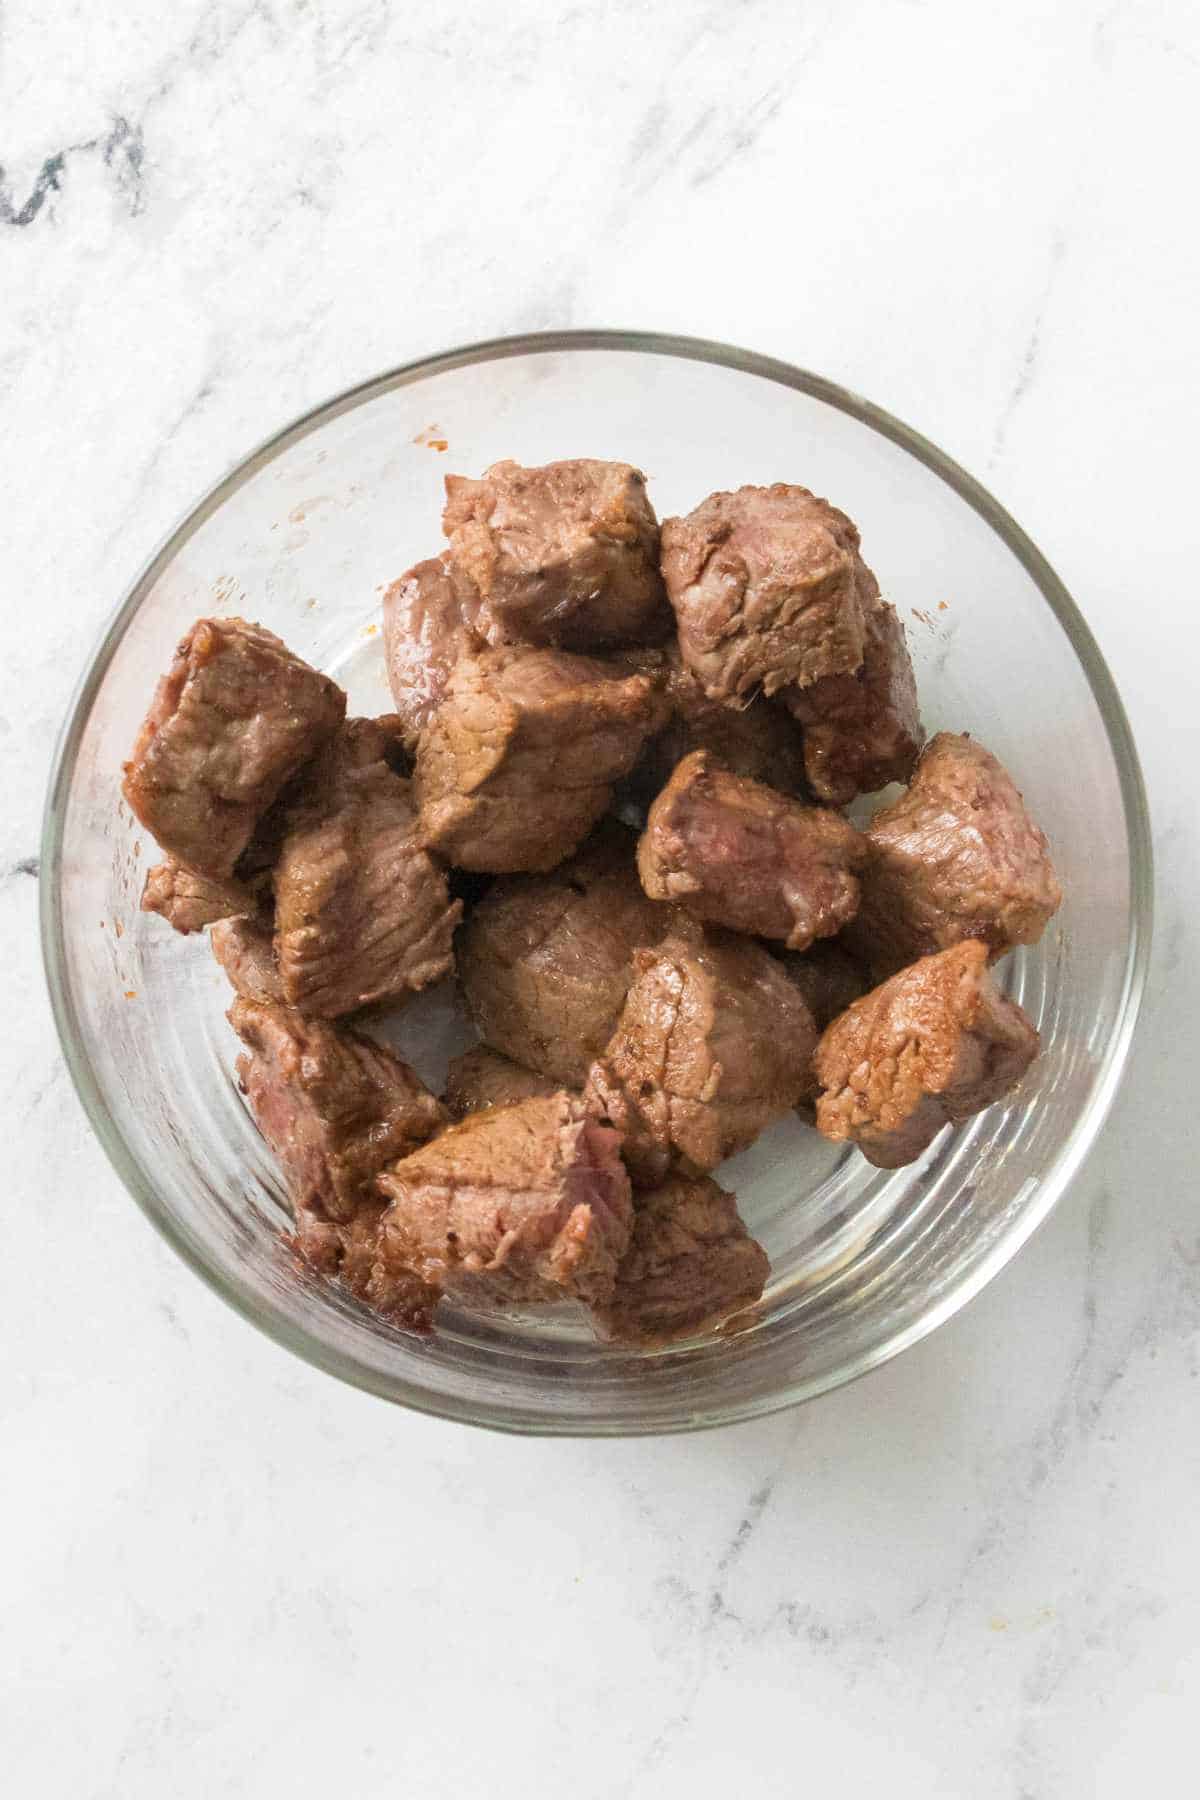 cubed seasoned cooked steak in a bowl.